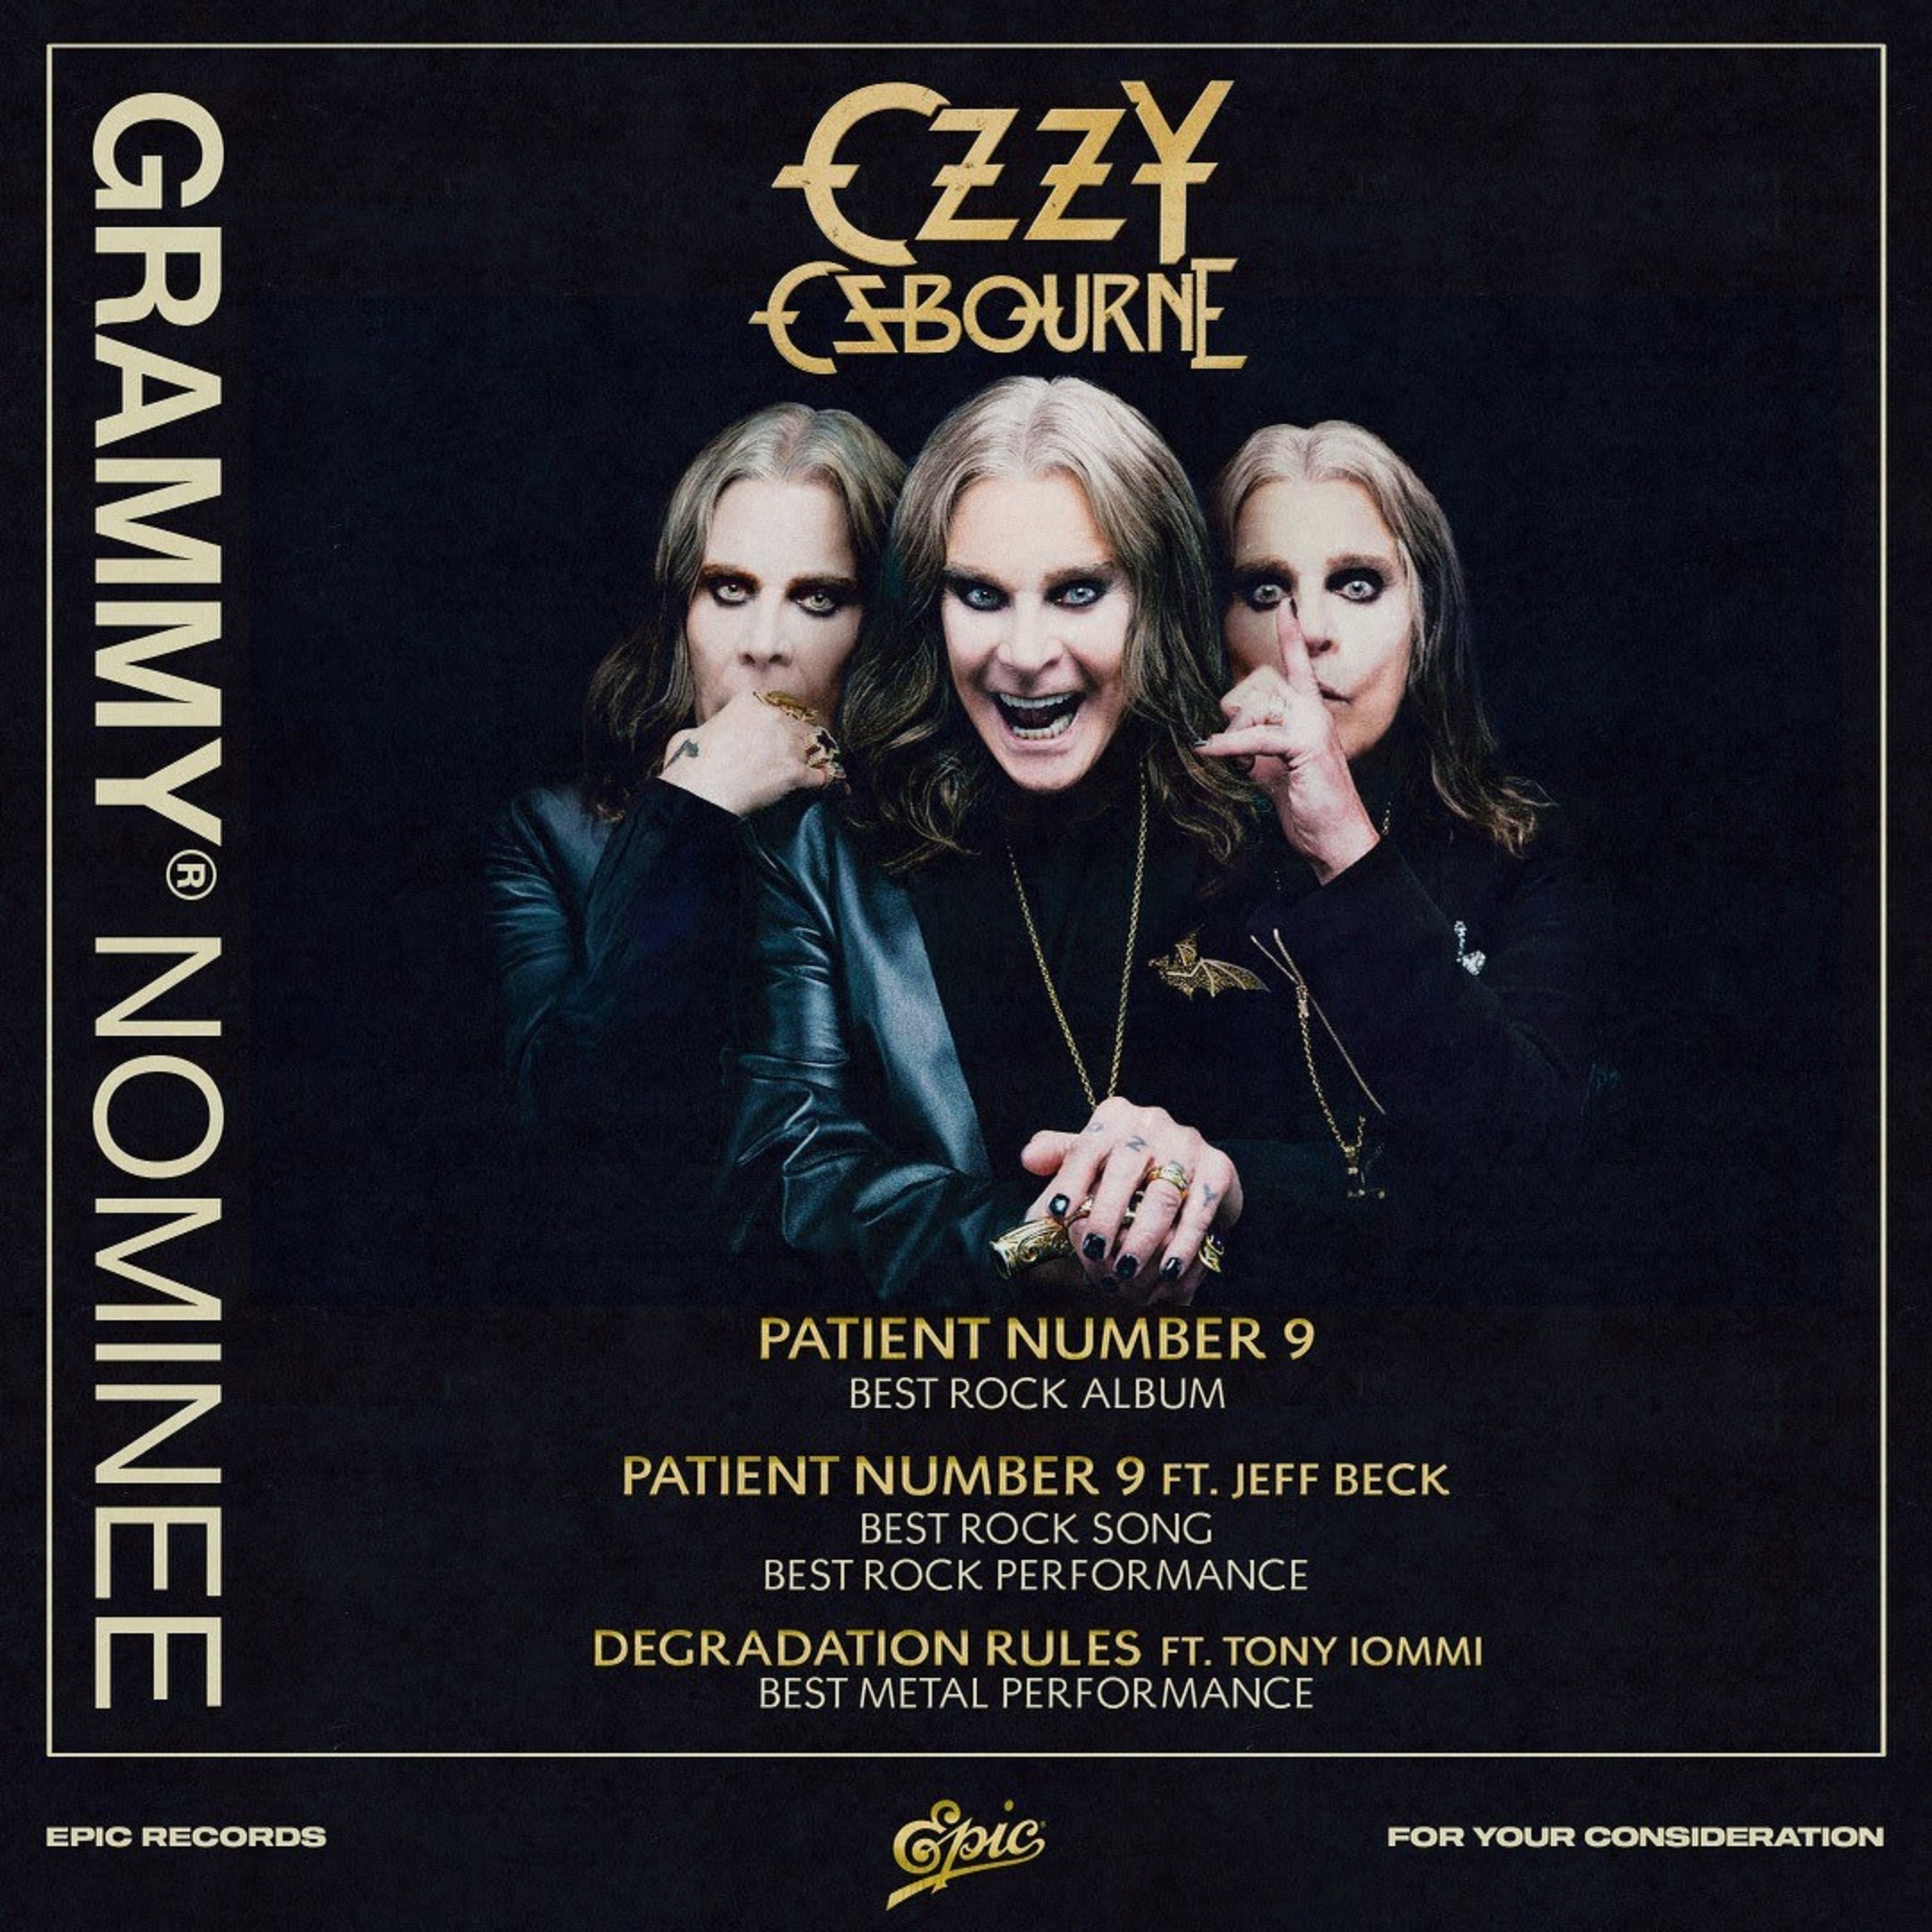 OZZY OSBOURNE Talks About The Four Grammy Nominations For His ‘Patient